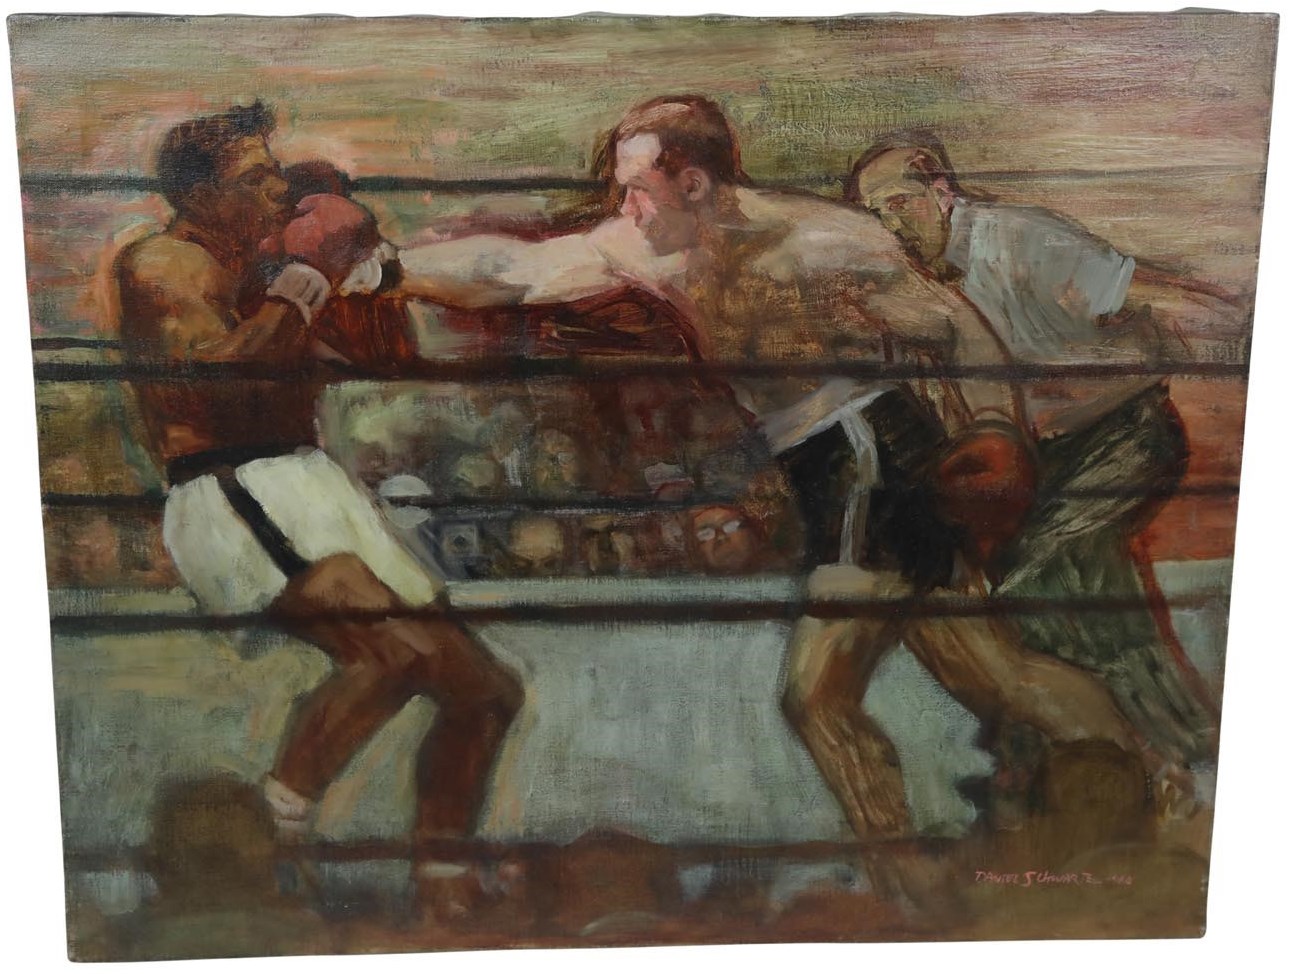 Muhammad Ali & Boxing - 1959 "Ingemar Johansson Knocks out Floyd Patterson" Oil on Canvas by Daniel Schwartz - Featured in 1960 Esquire Magazine